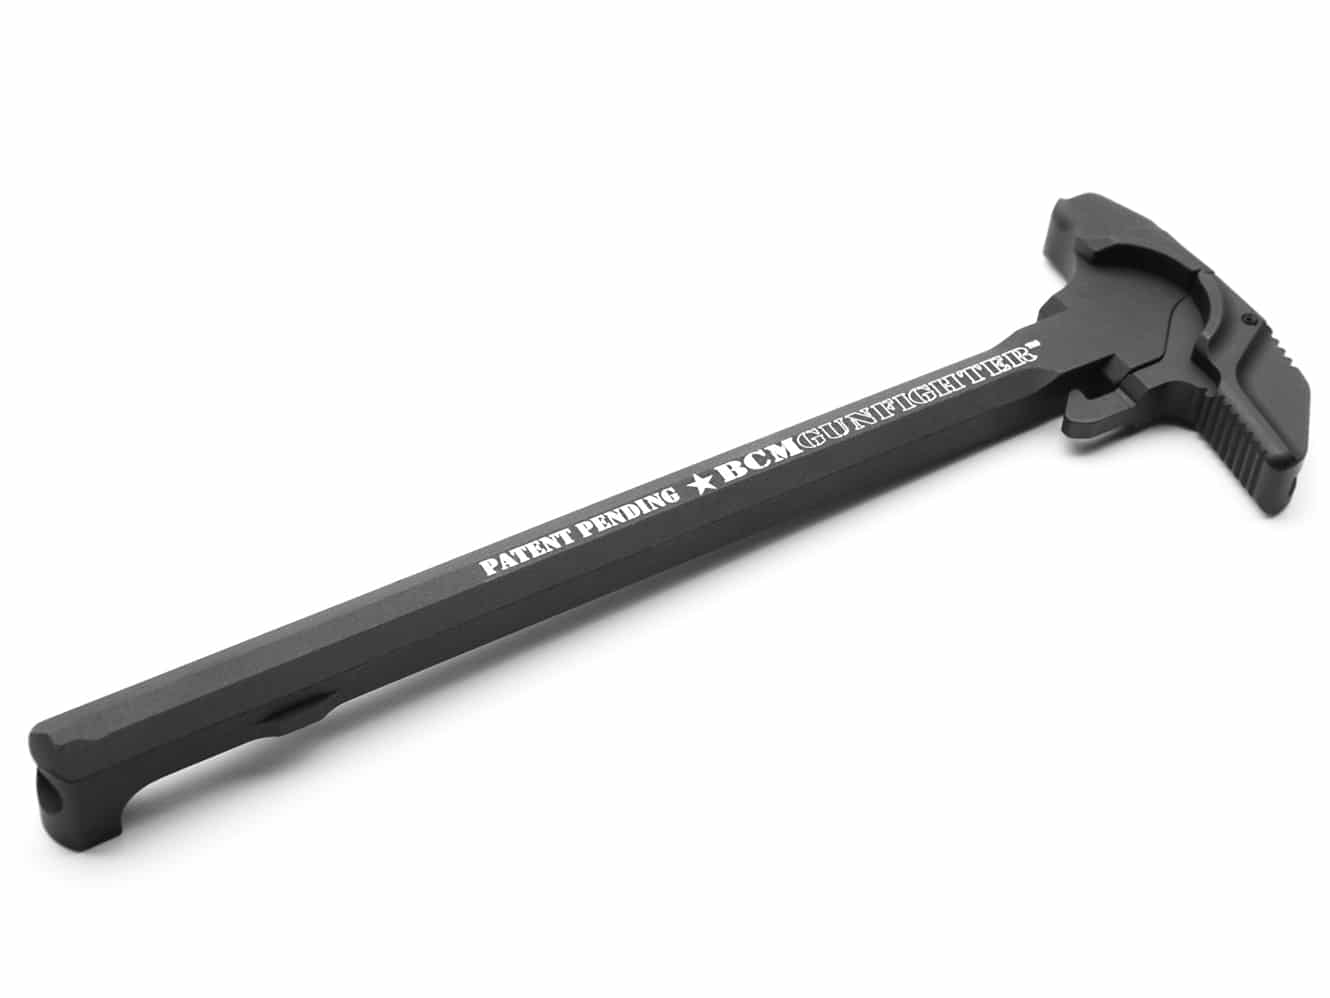 bcm charge handle, bcm charging handle mod 3b